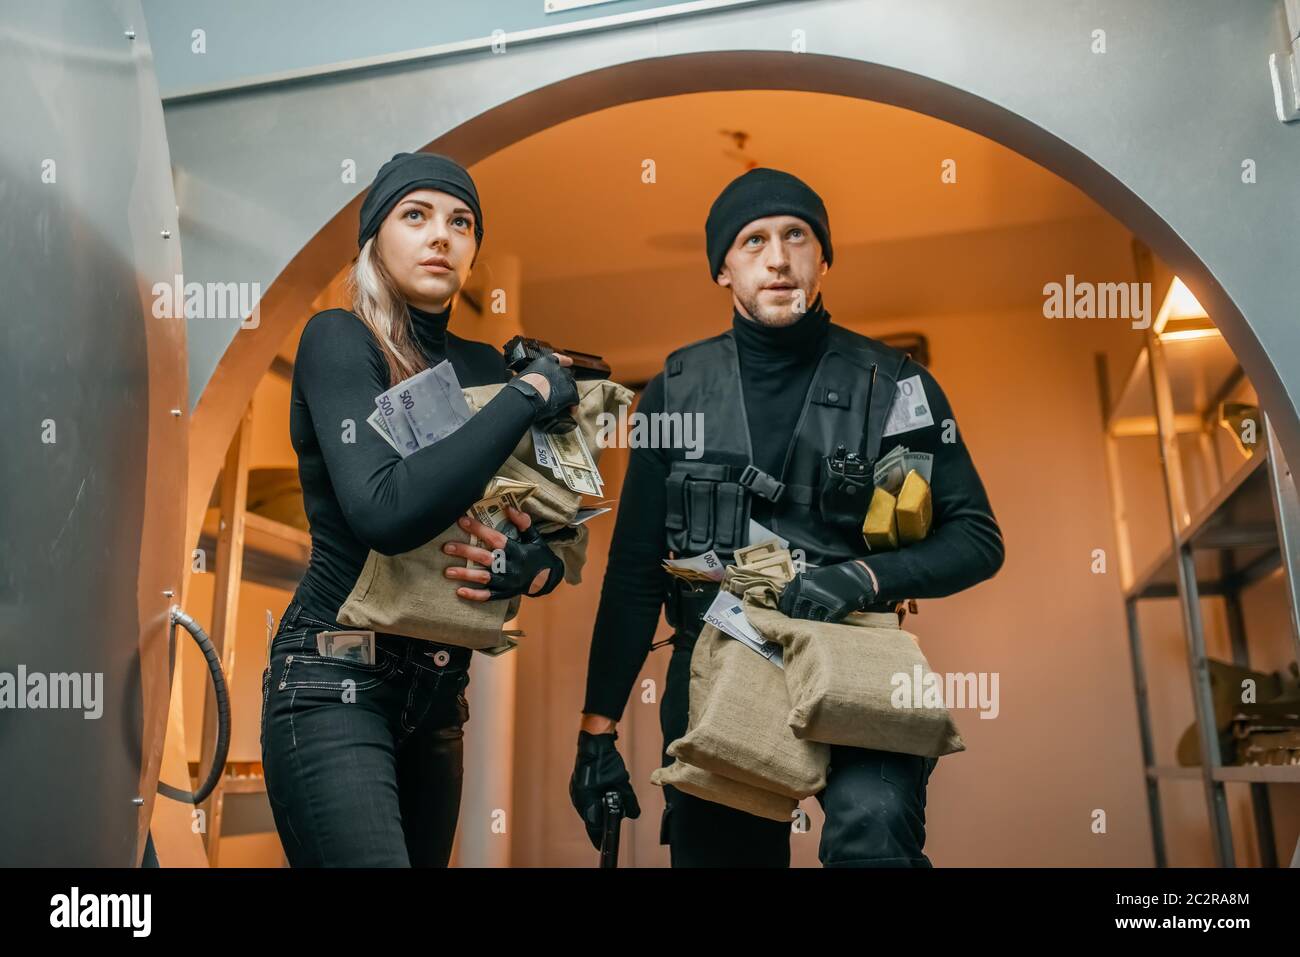 Bank robbery, two robbers with money left the vault. Criminal profession, theft concept, male and female burglars Stock Photo